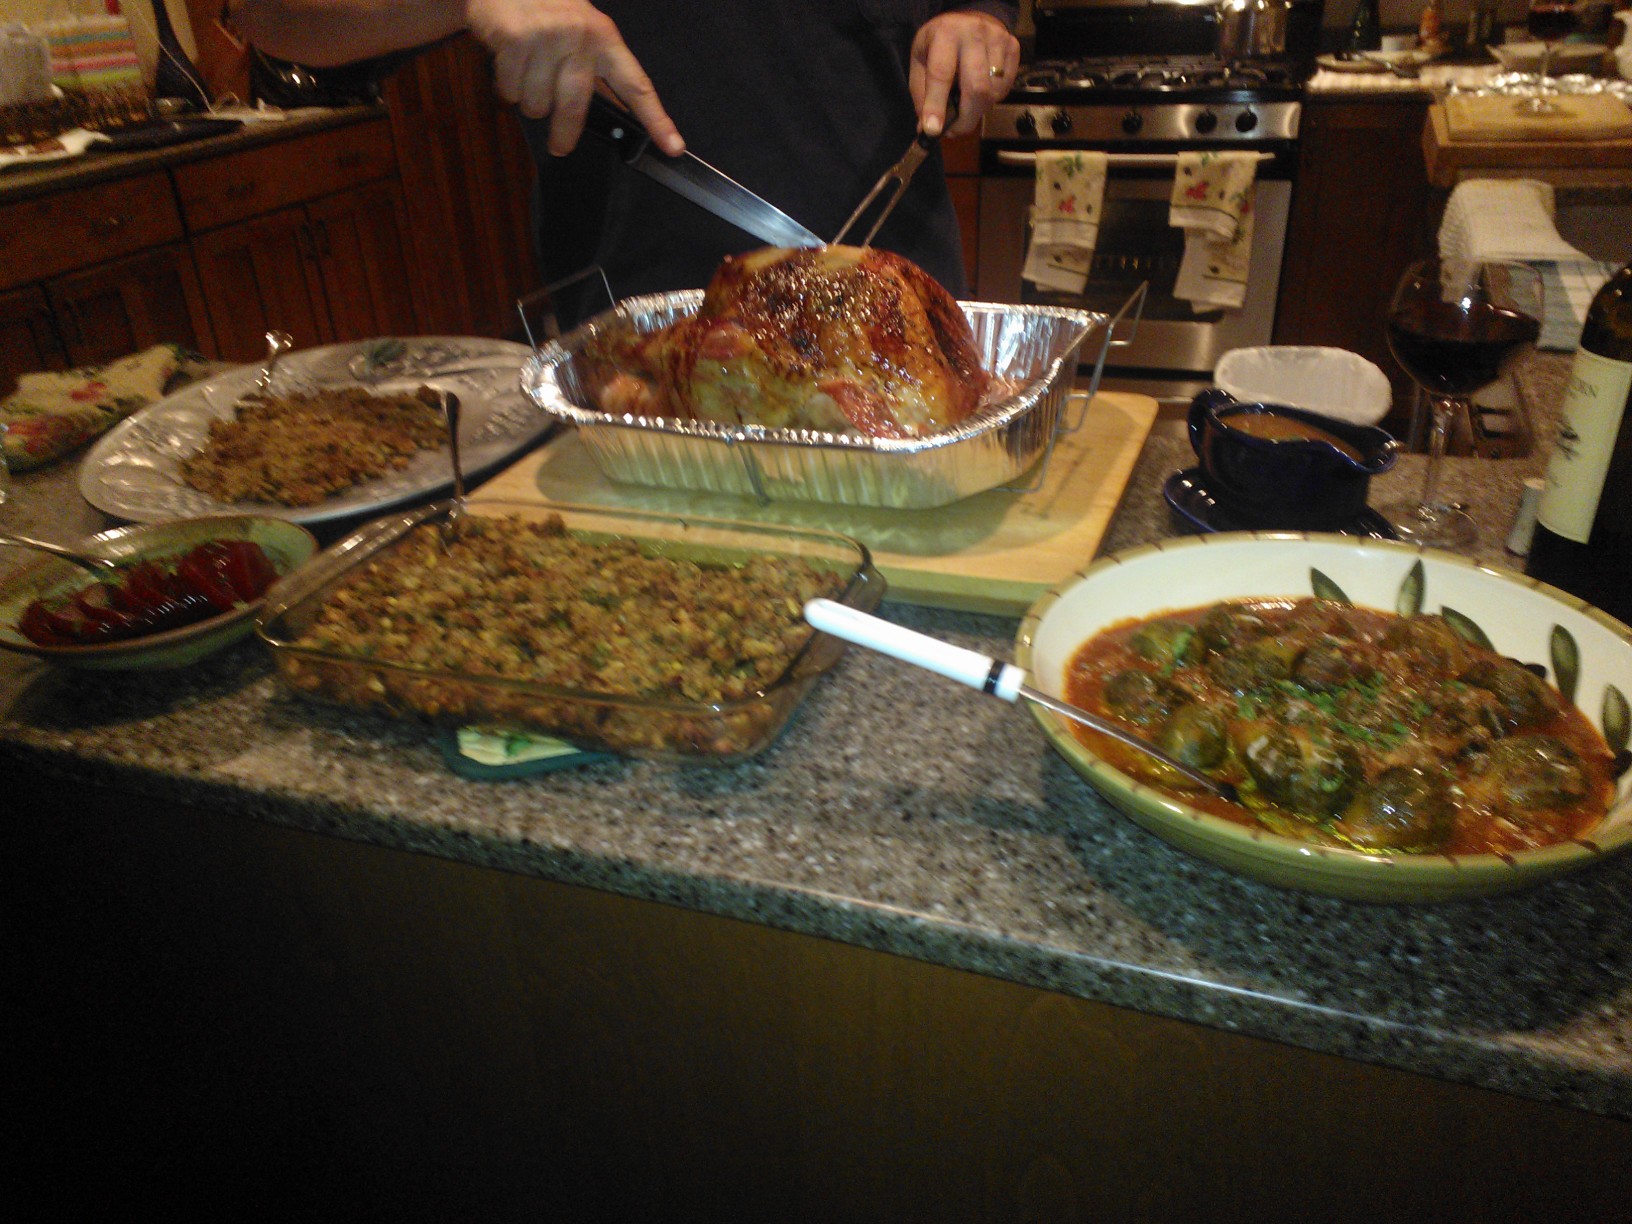 Thanksgiving In Glens Falls With My Glens Falls Gourmet Pal As Our ...